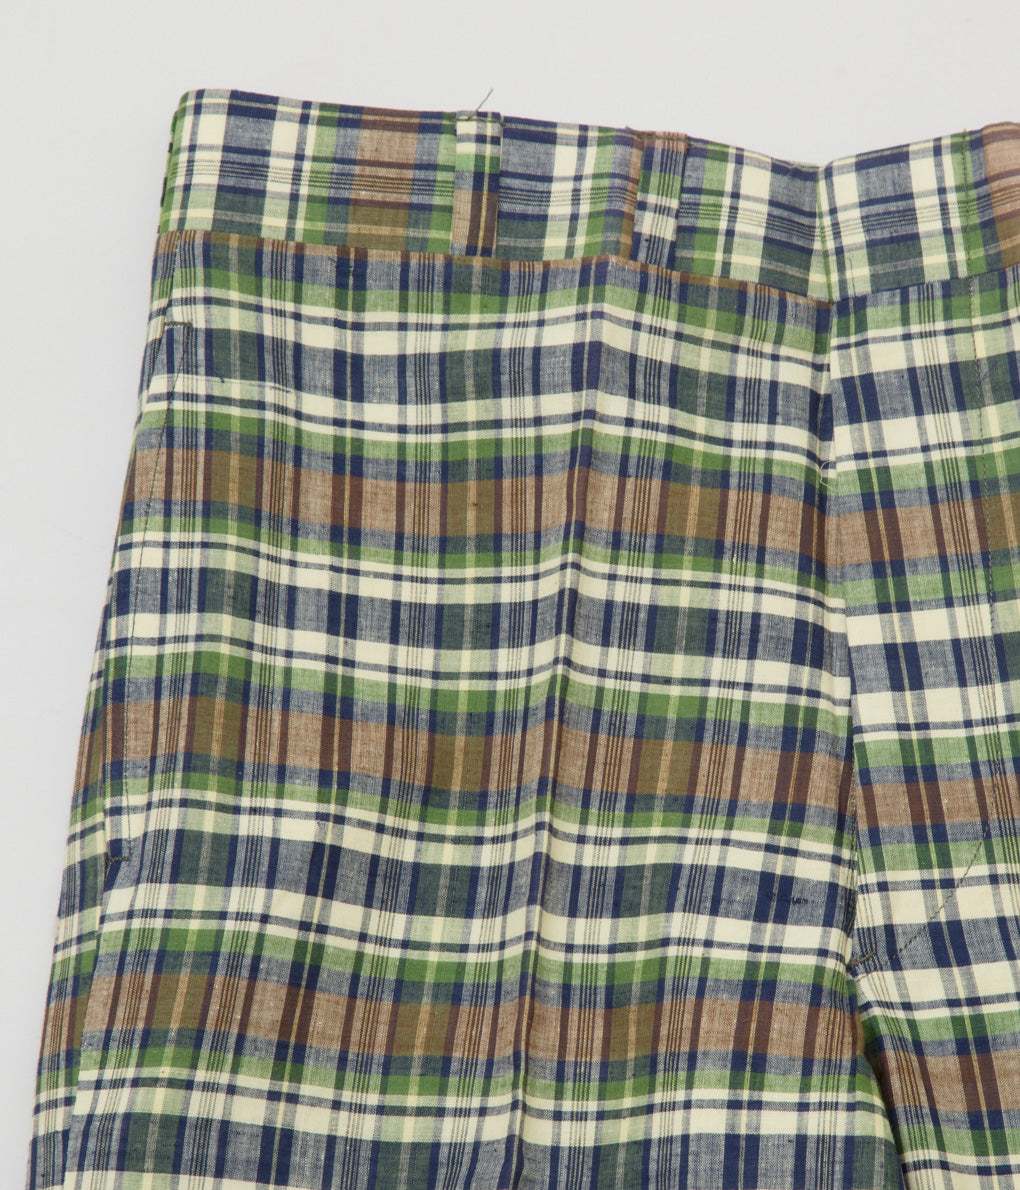 VINTAGE "O'CONNELLS LUCAS-CHELF MADE IN CORBI N MADRAS CHECK TROUSER"(GREEN CHECK)